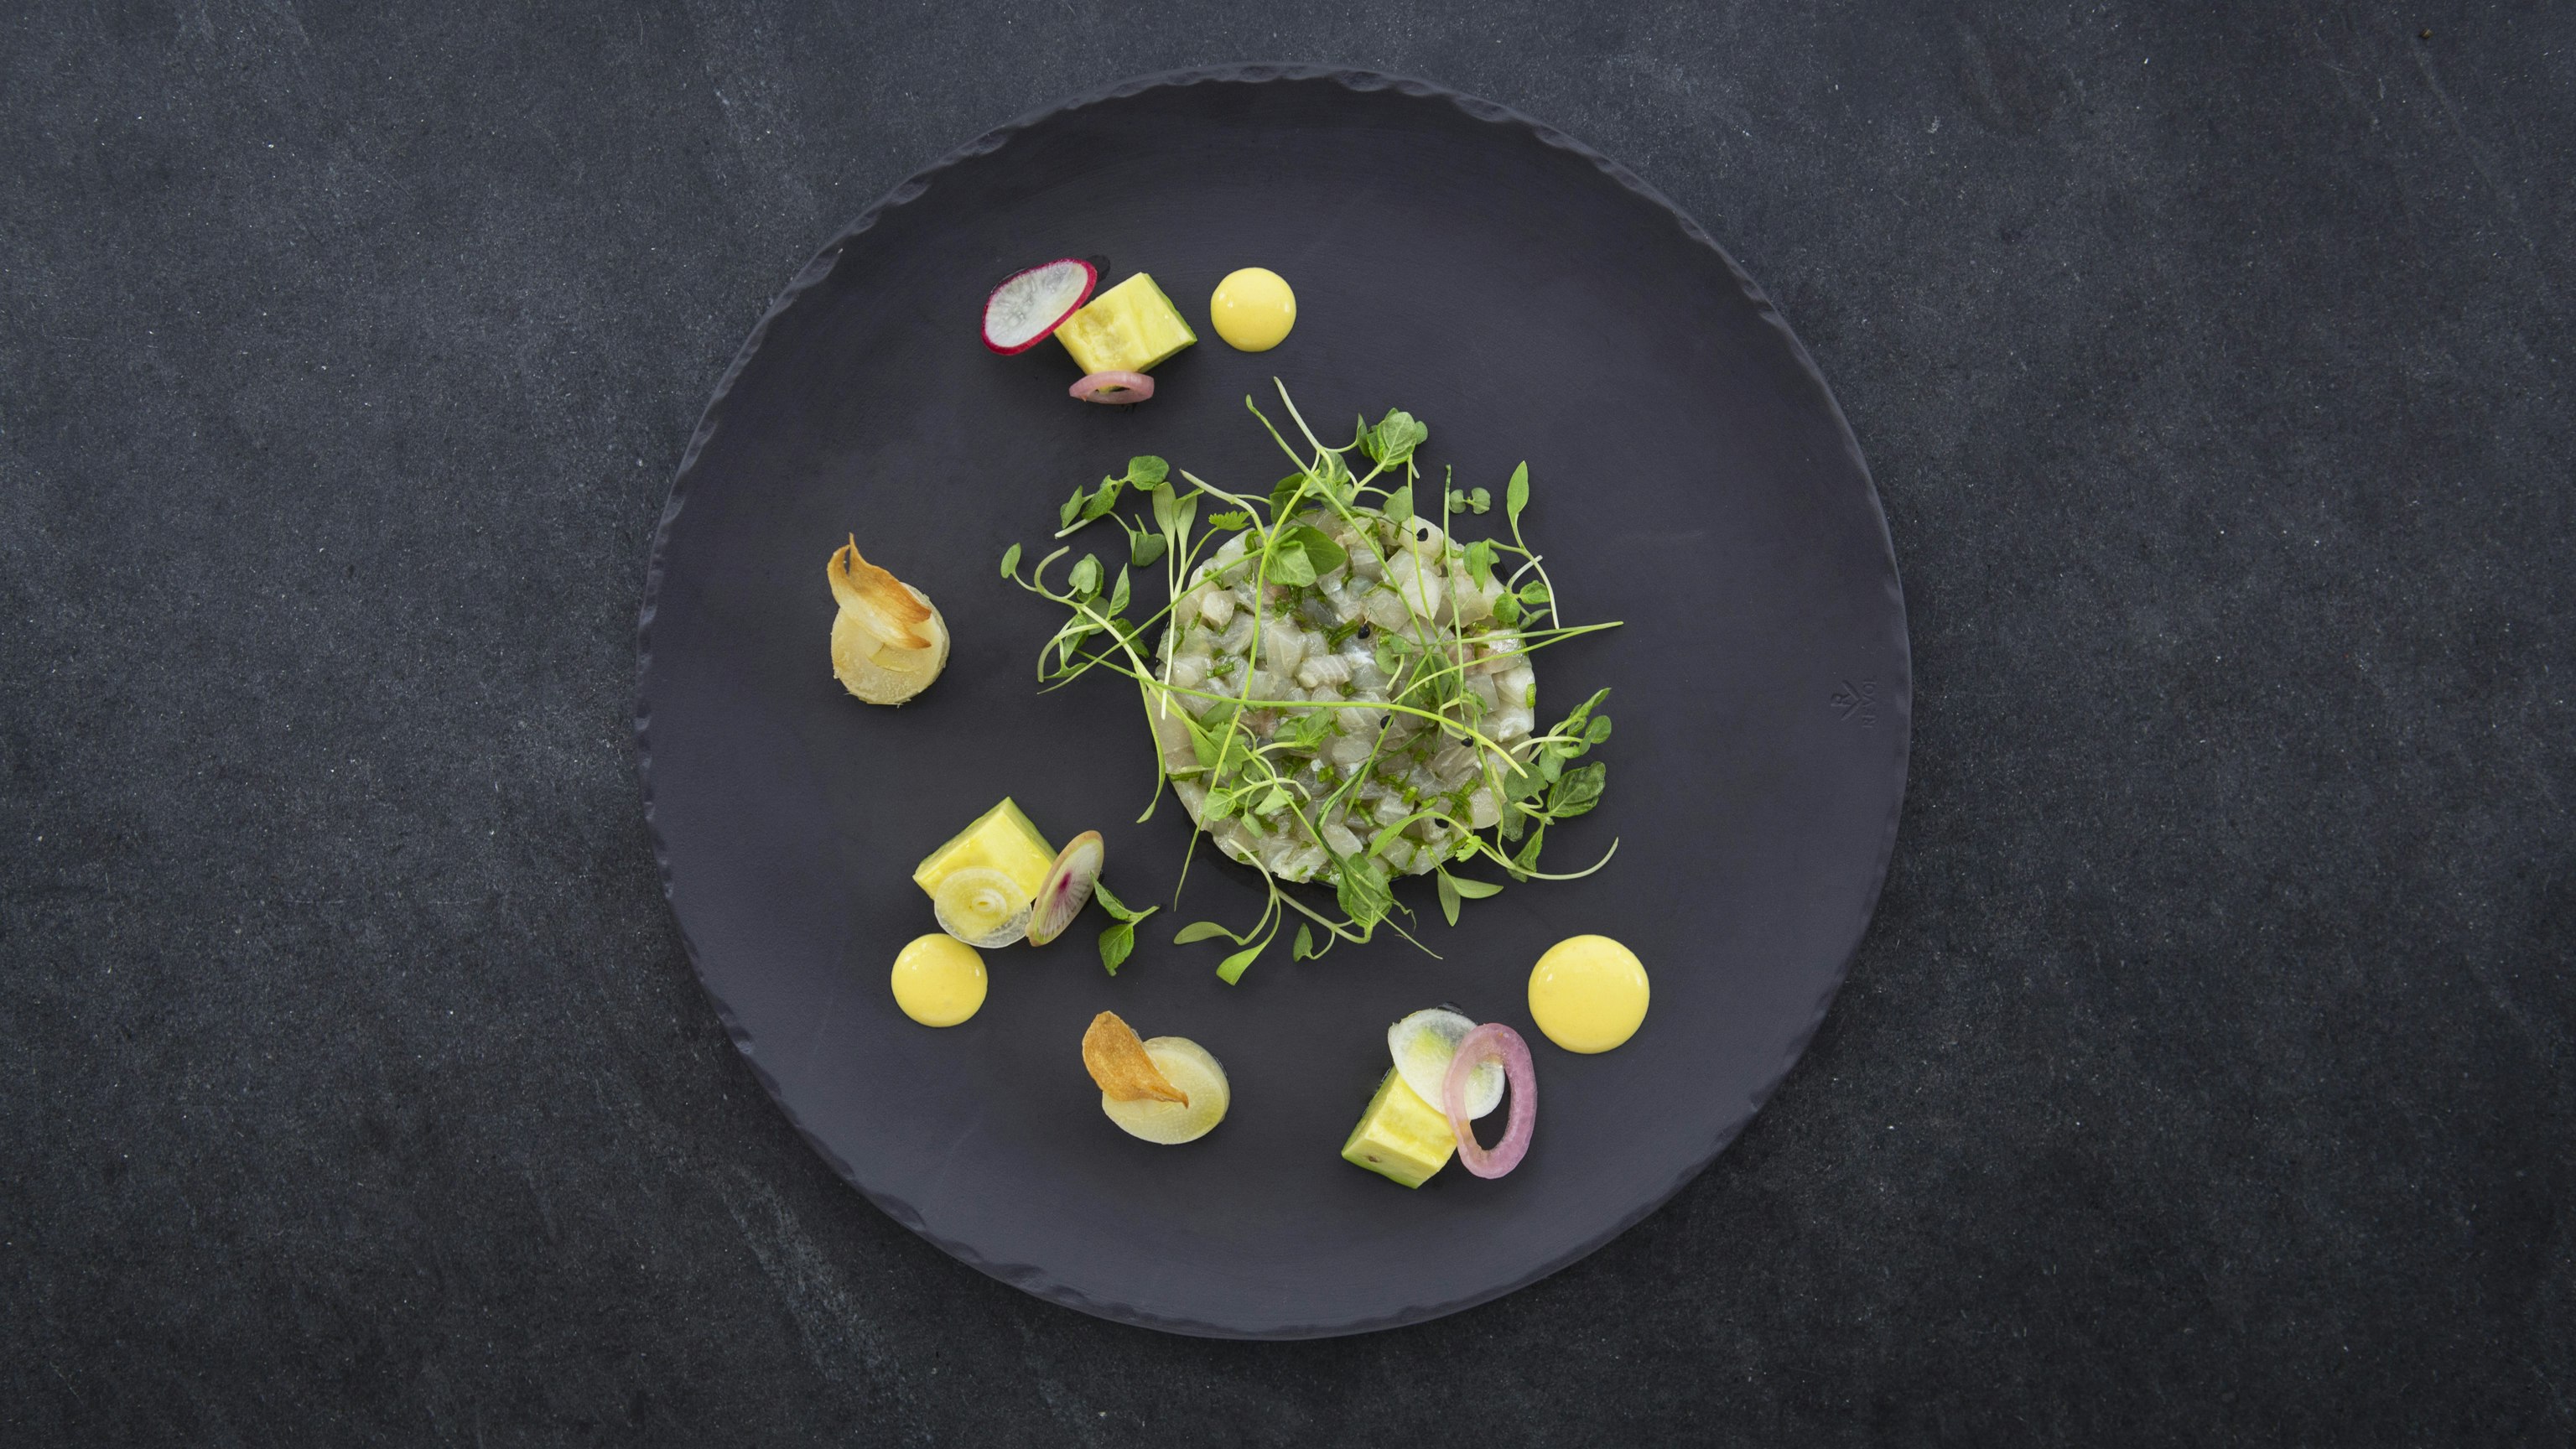 A round, gray slate plate with delicately presented morsels of food.